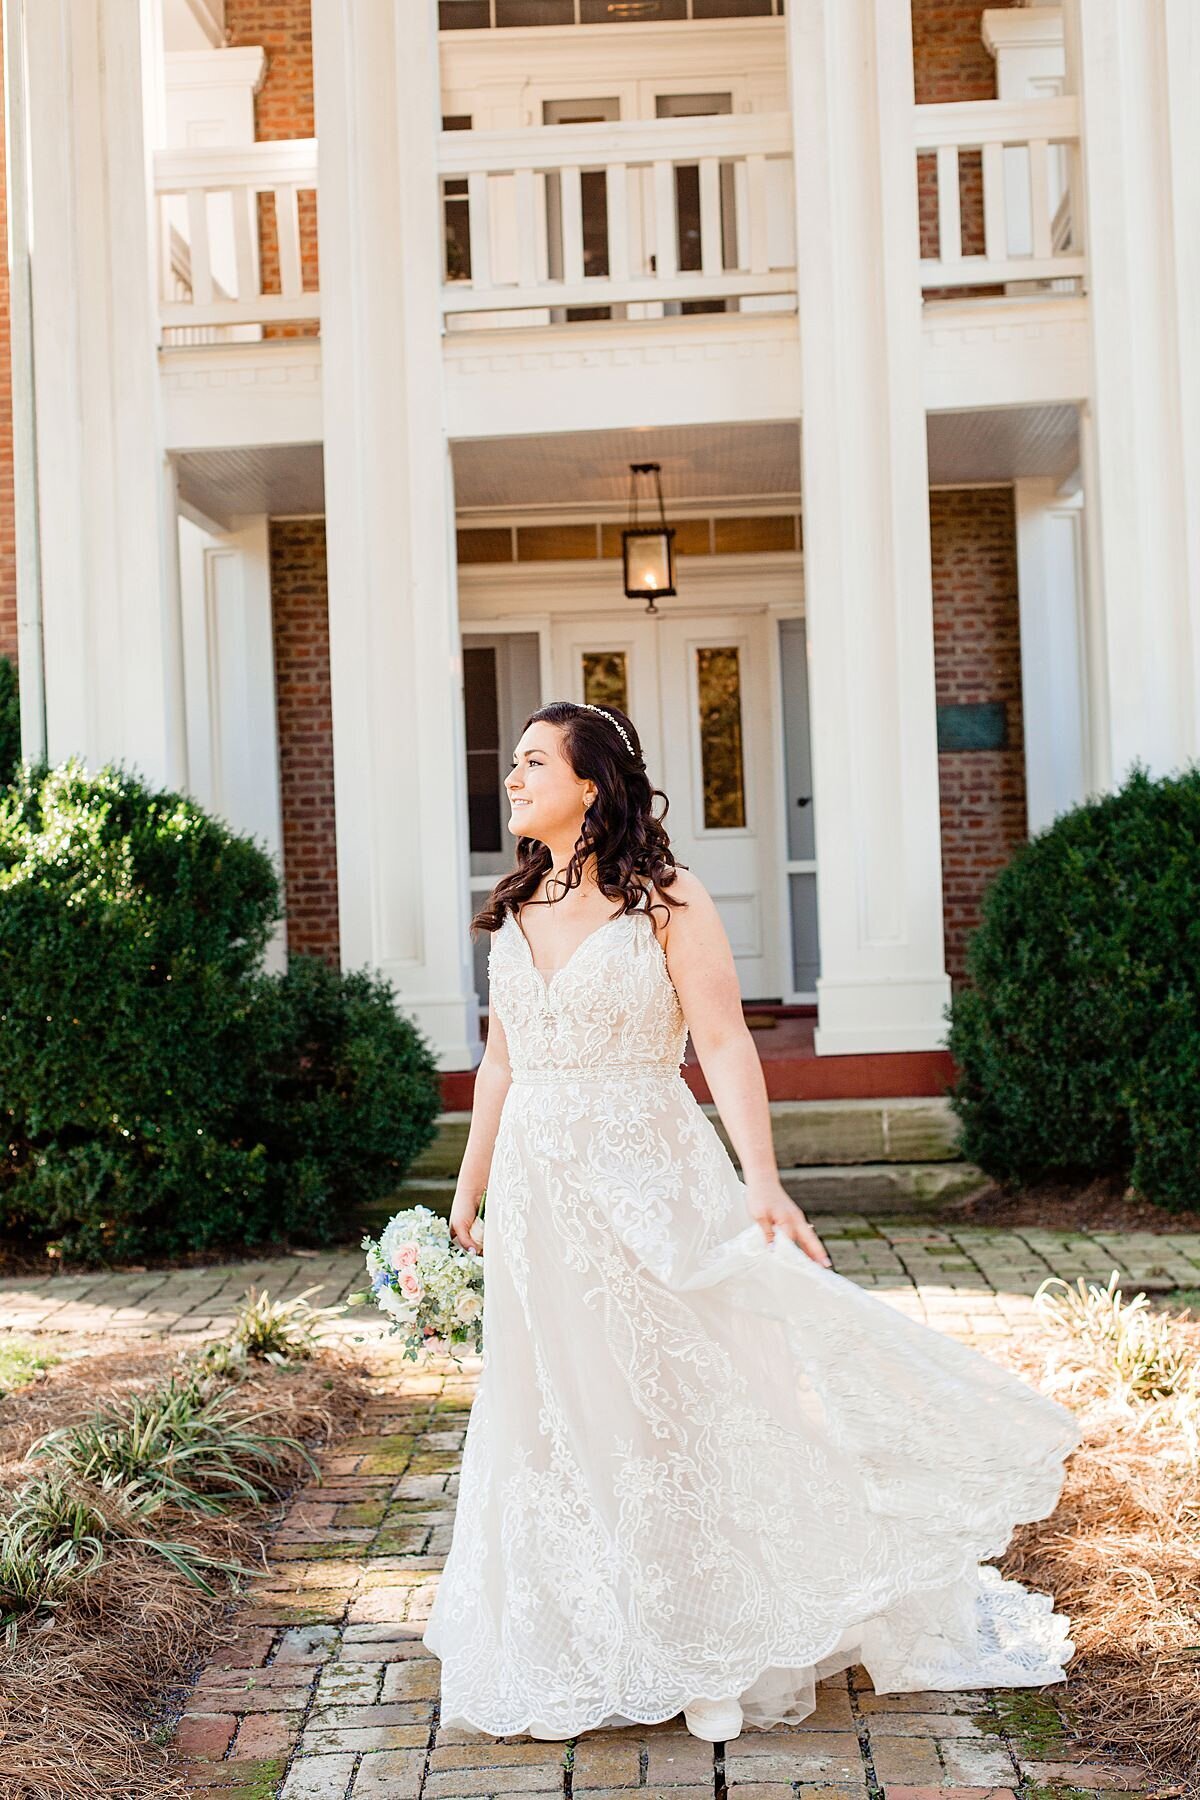 The bride is standing in front of a large white mansion with a two tier porch. She is standing on a stone path with green bushes on either side. The bride is wearing a lace dress with a long flowing skirt that blows in the breeze. The dress has a plunging neckline and spaghetti straps. She is holding a white and blush bouquet down at her side.